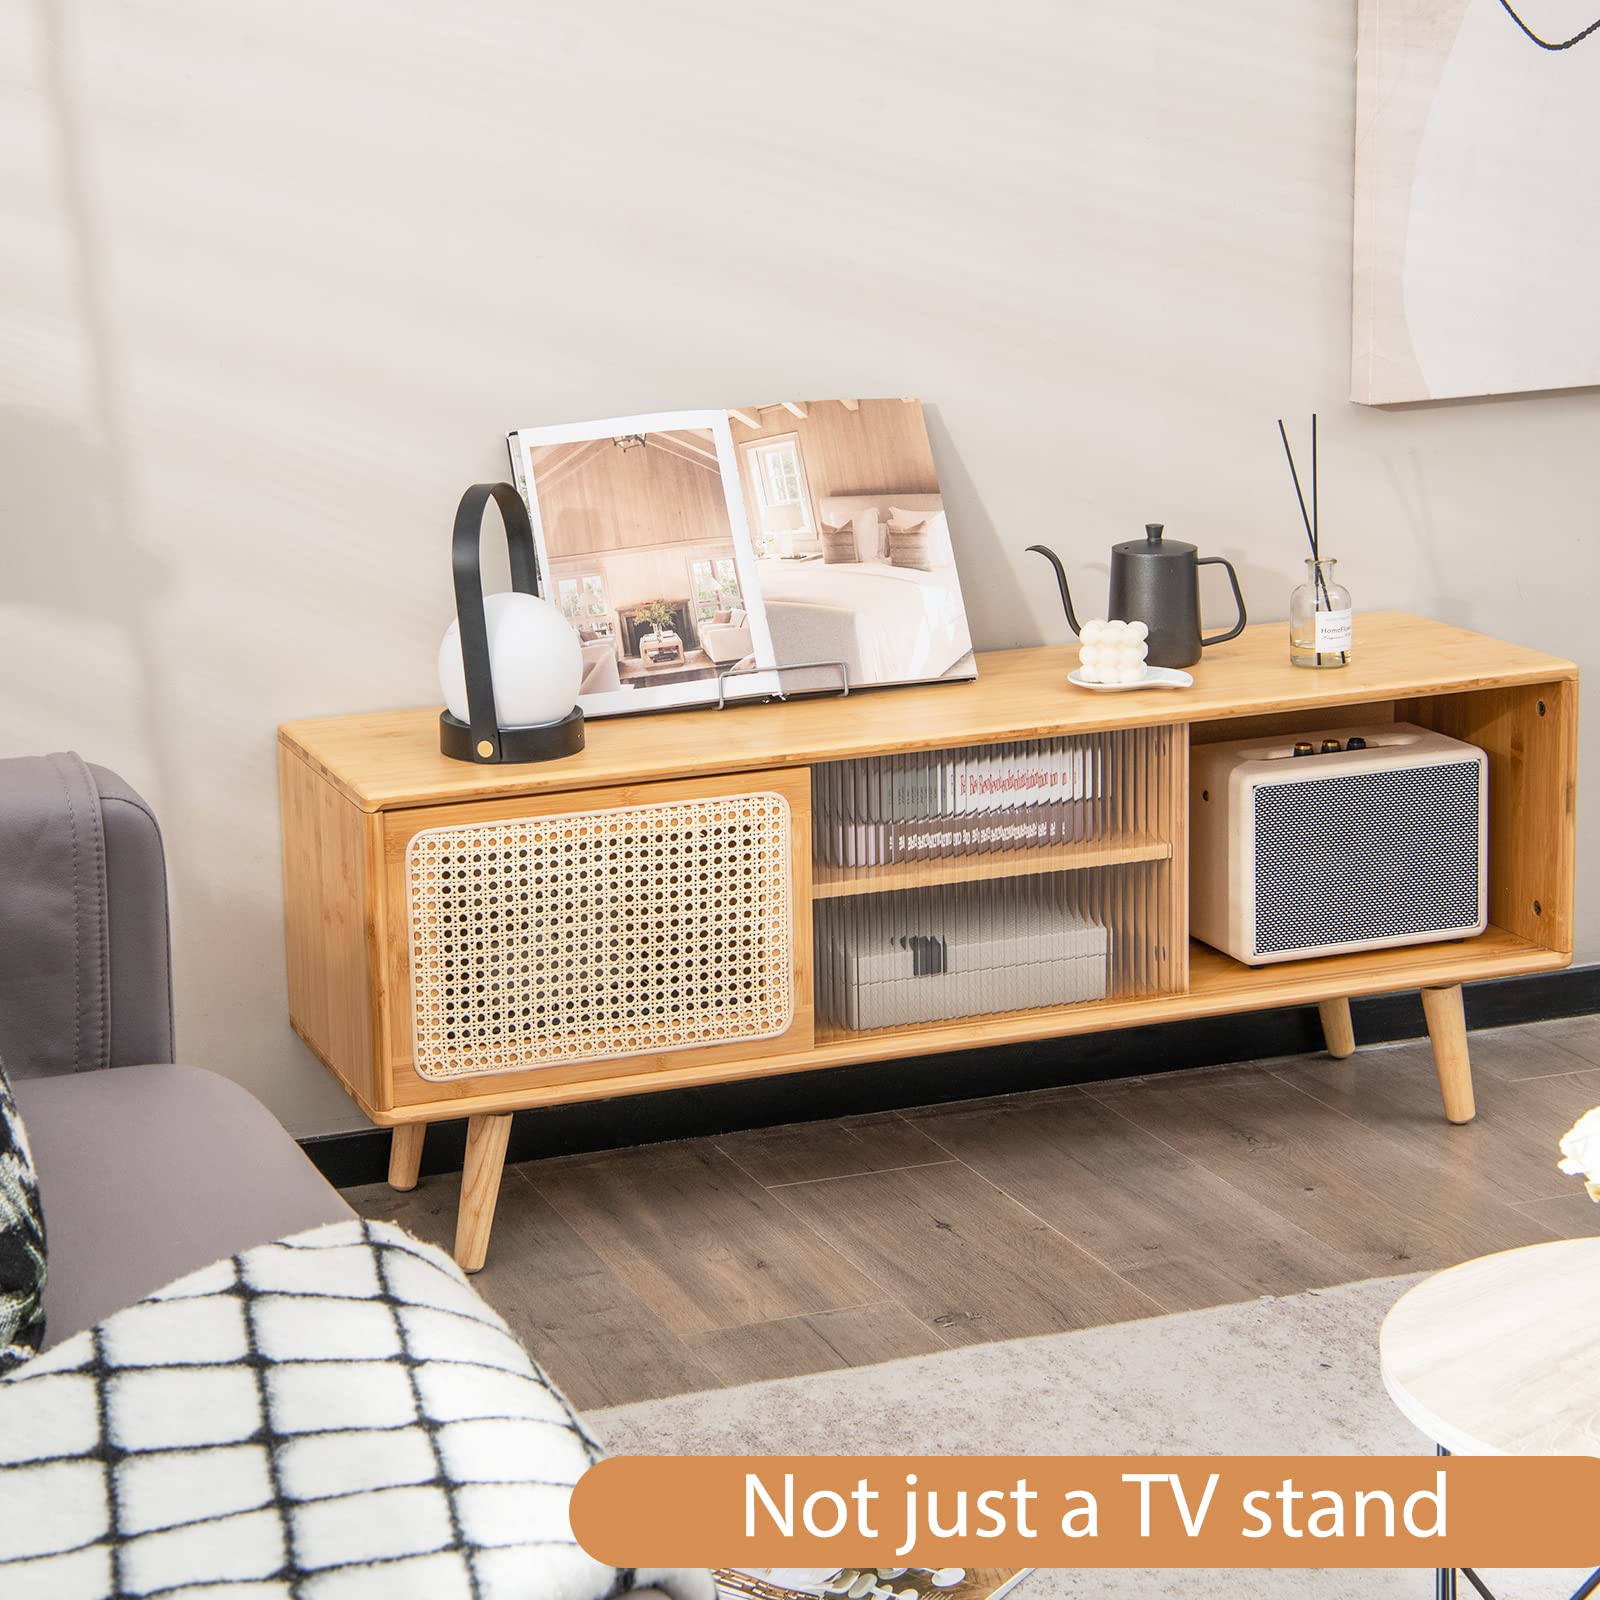 Giantex TV Stand for Living Room TVs up to 55”- Bamboo Entertainment Center